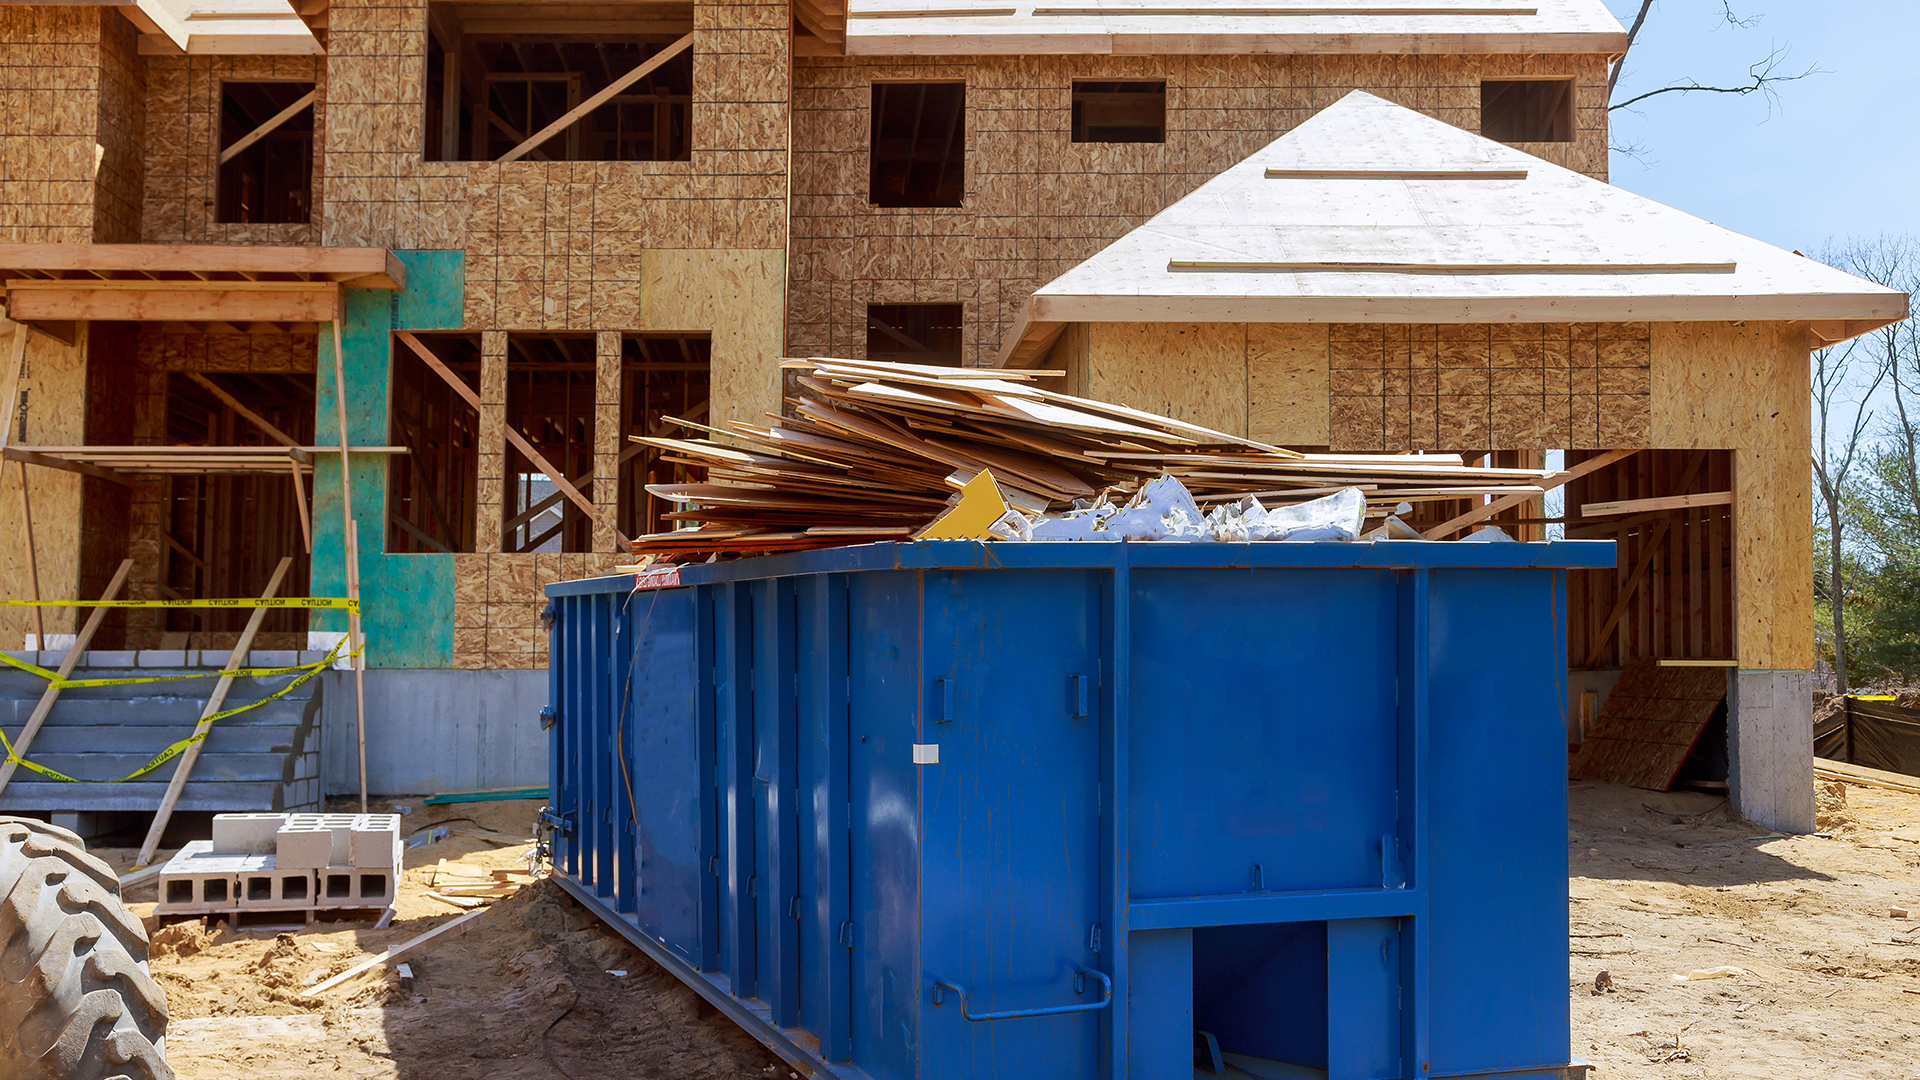 construction waste reduction with ConTech